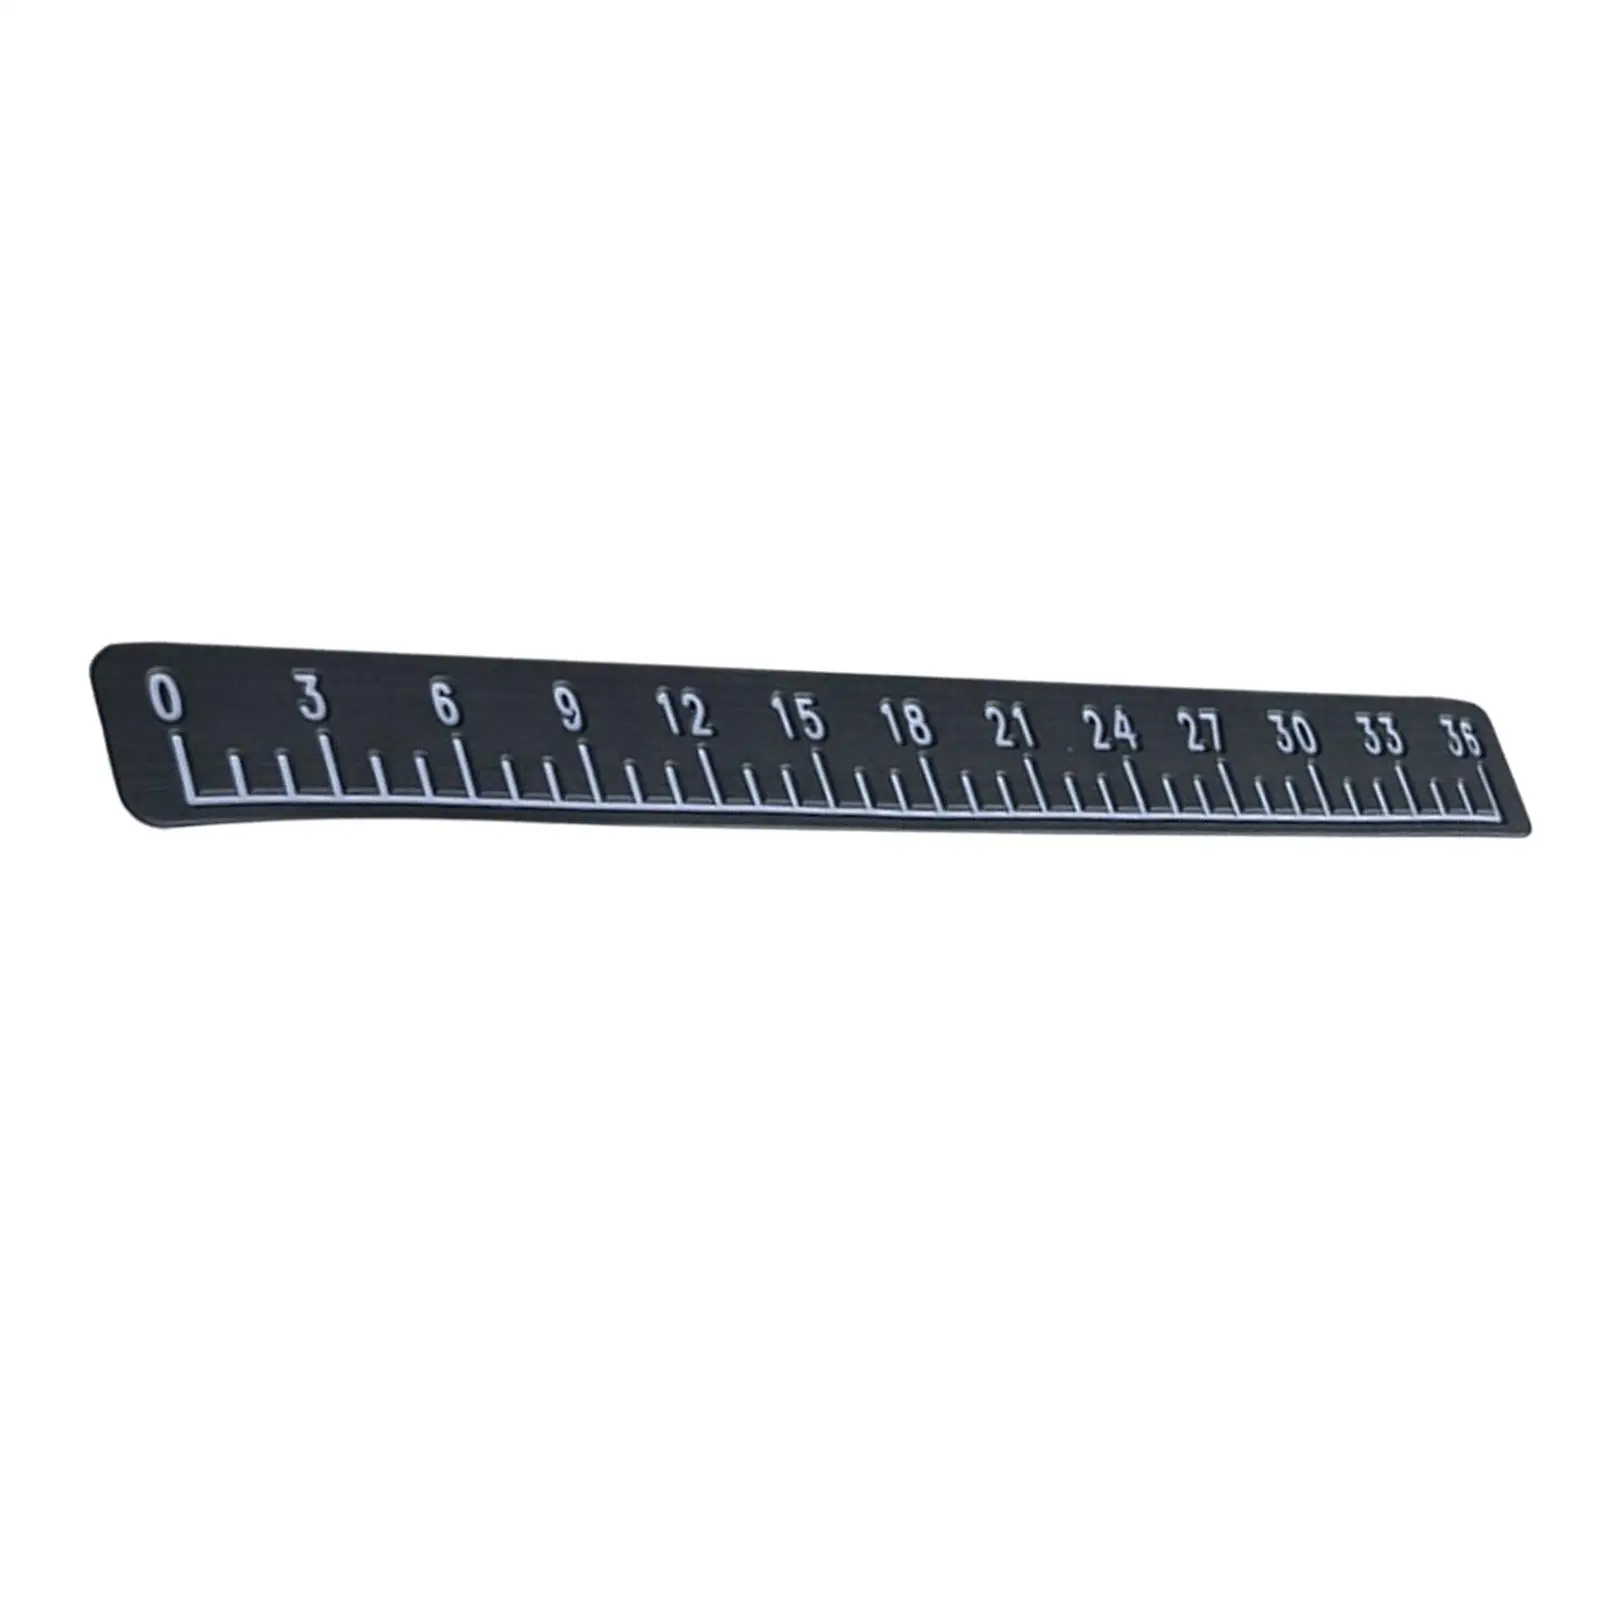 Fish Ruler for Boat 6mm Thickness Etched Numbers Fishing Measuring Tape for Yachts